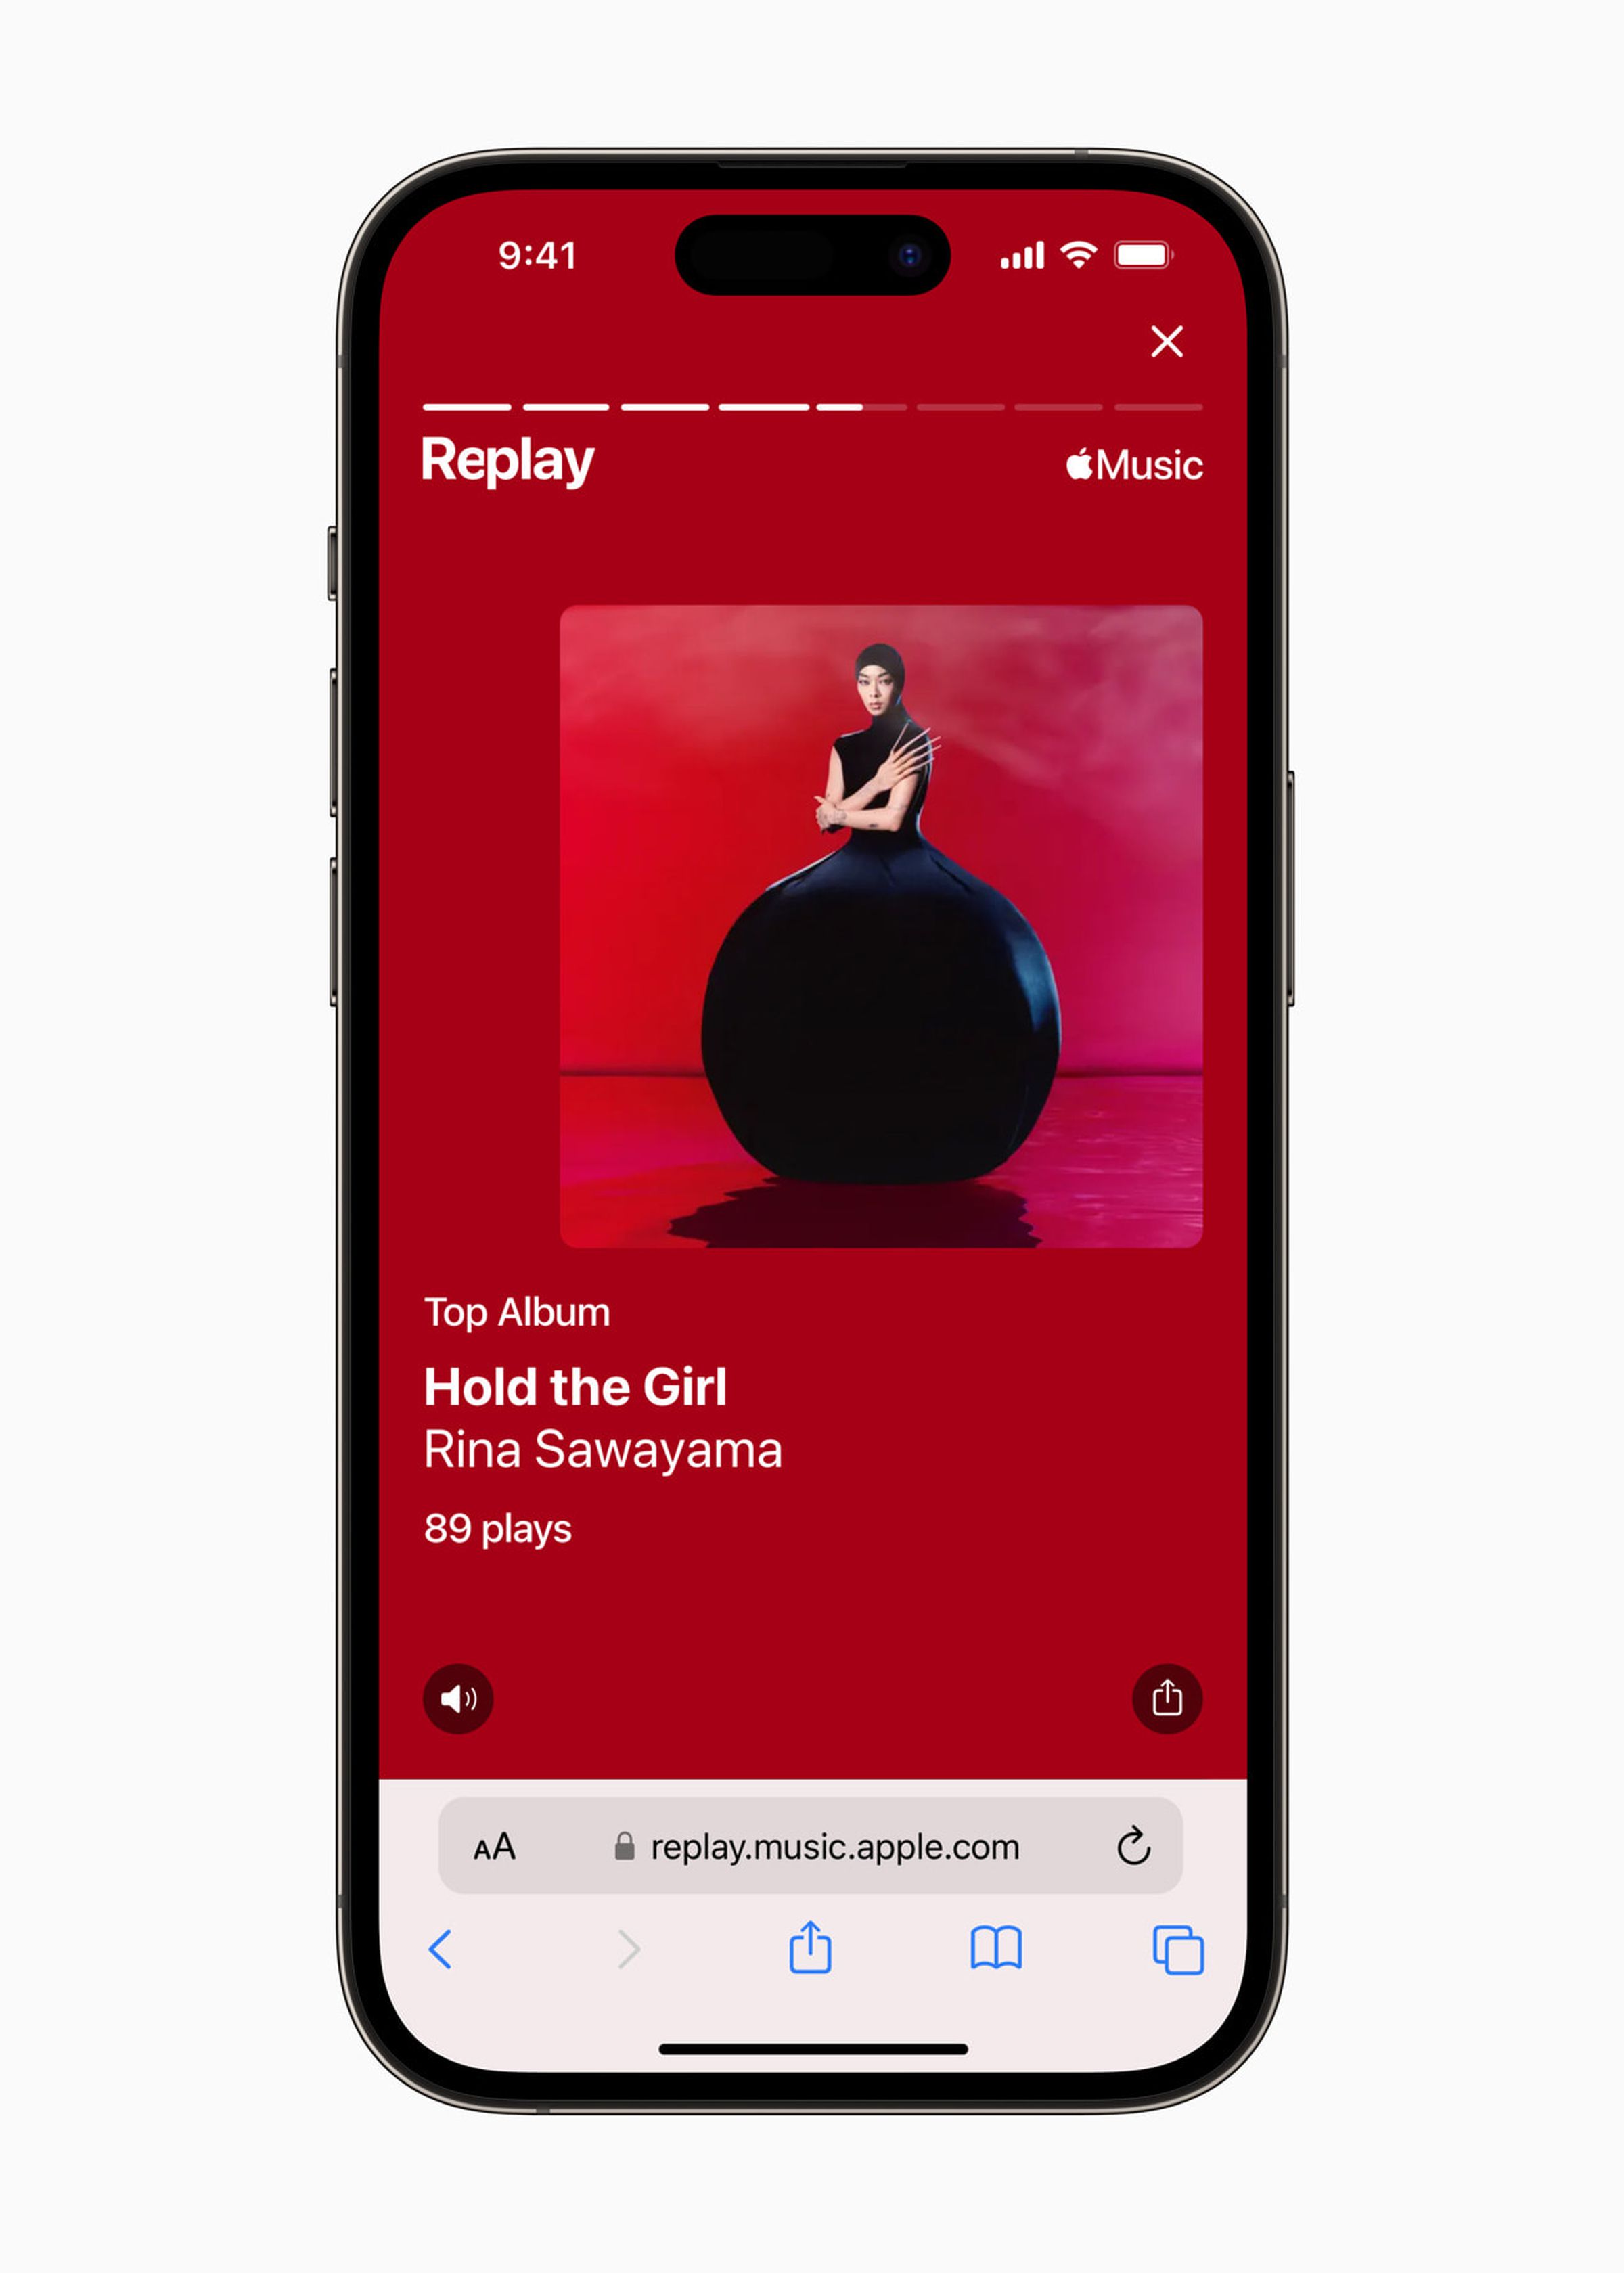 Apple Music Replay image features a listener's top album, Hold the Girl by Rina Sawayama.